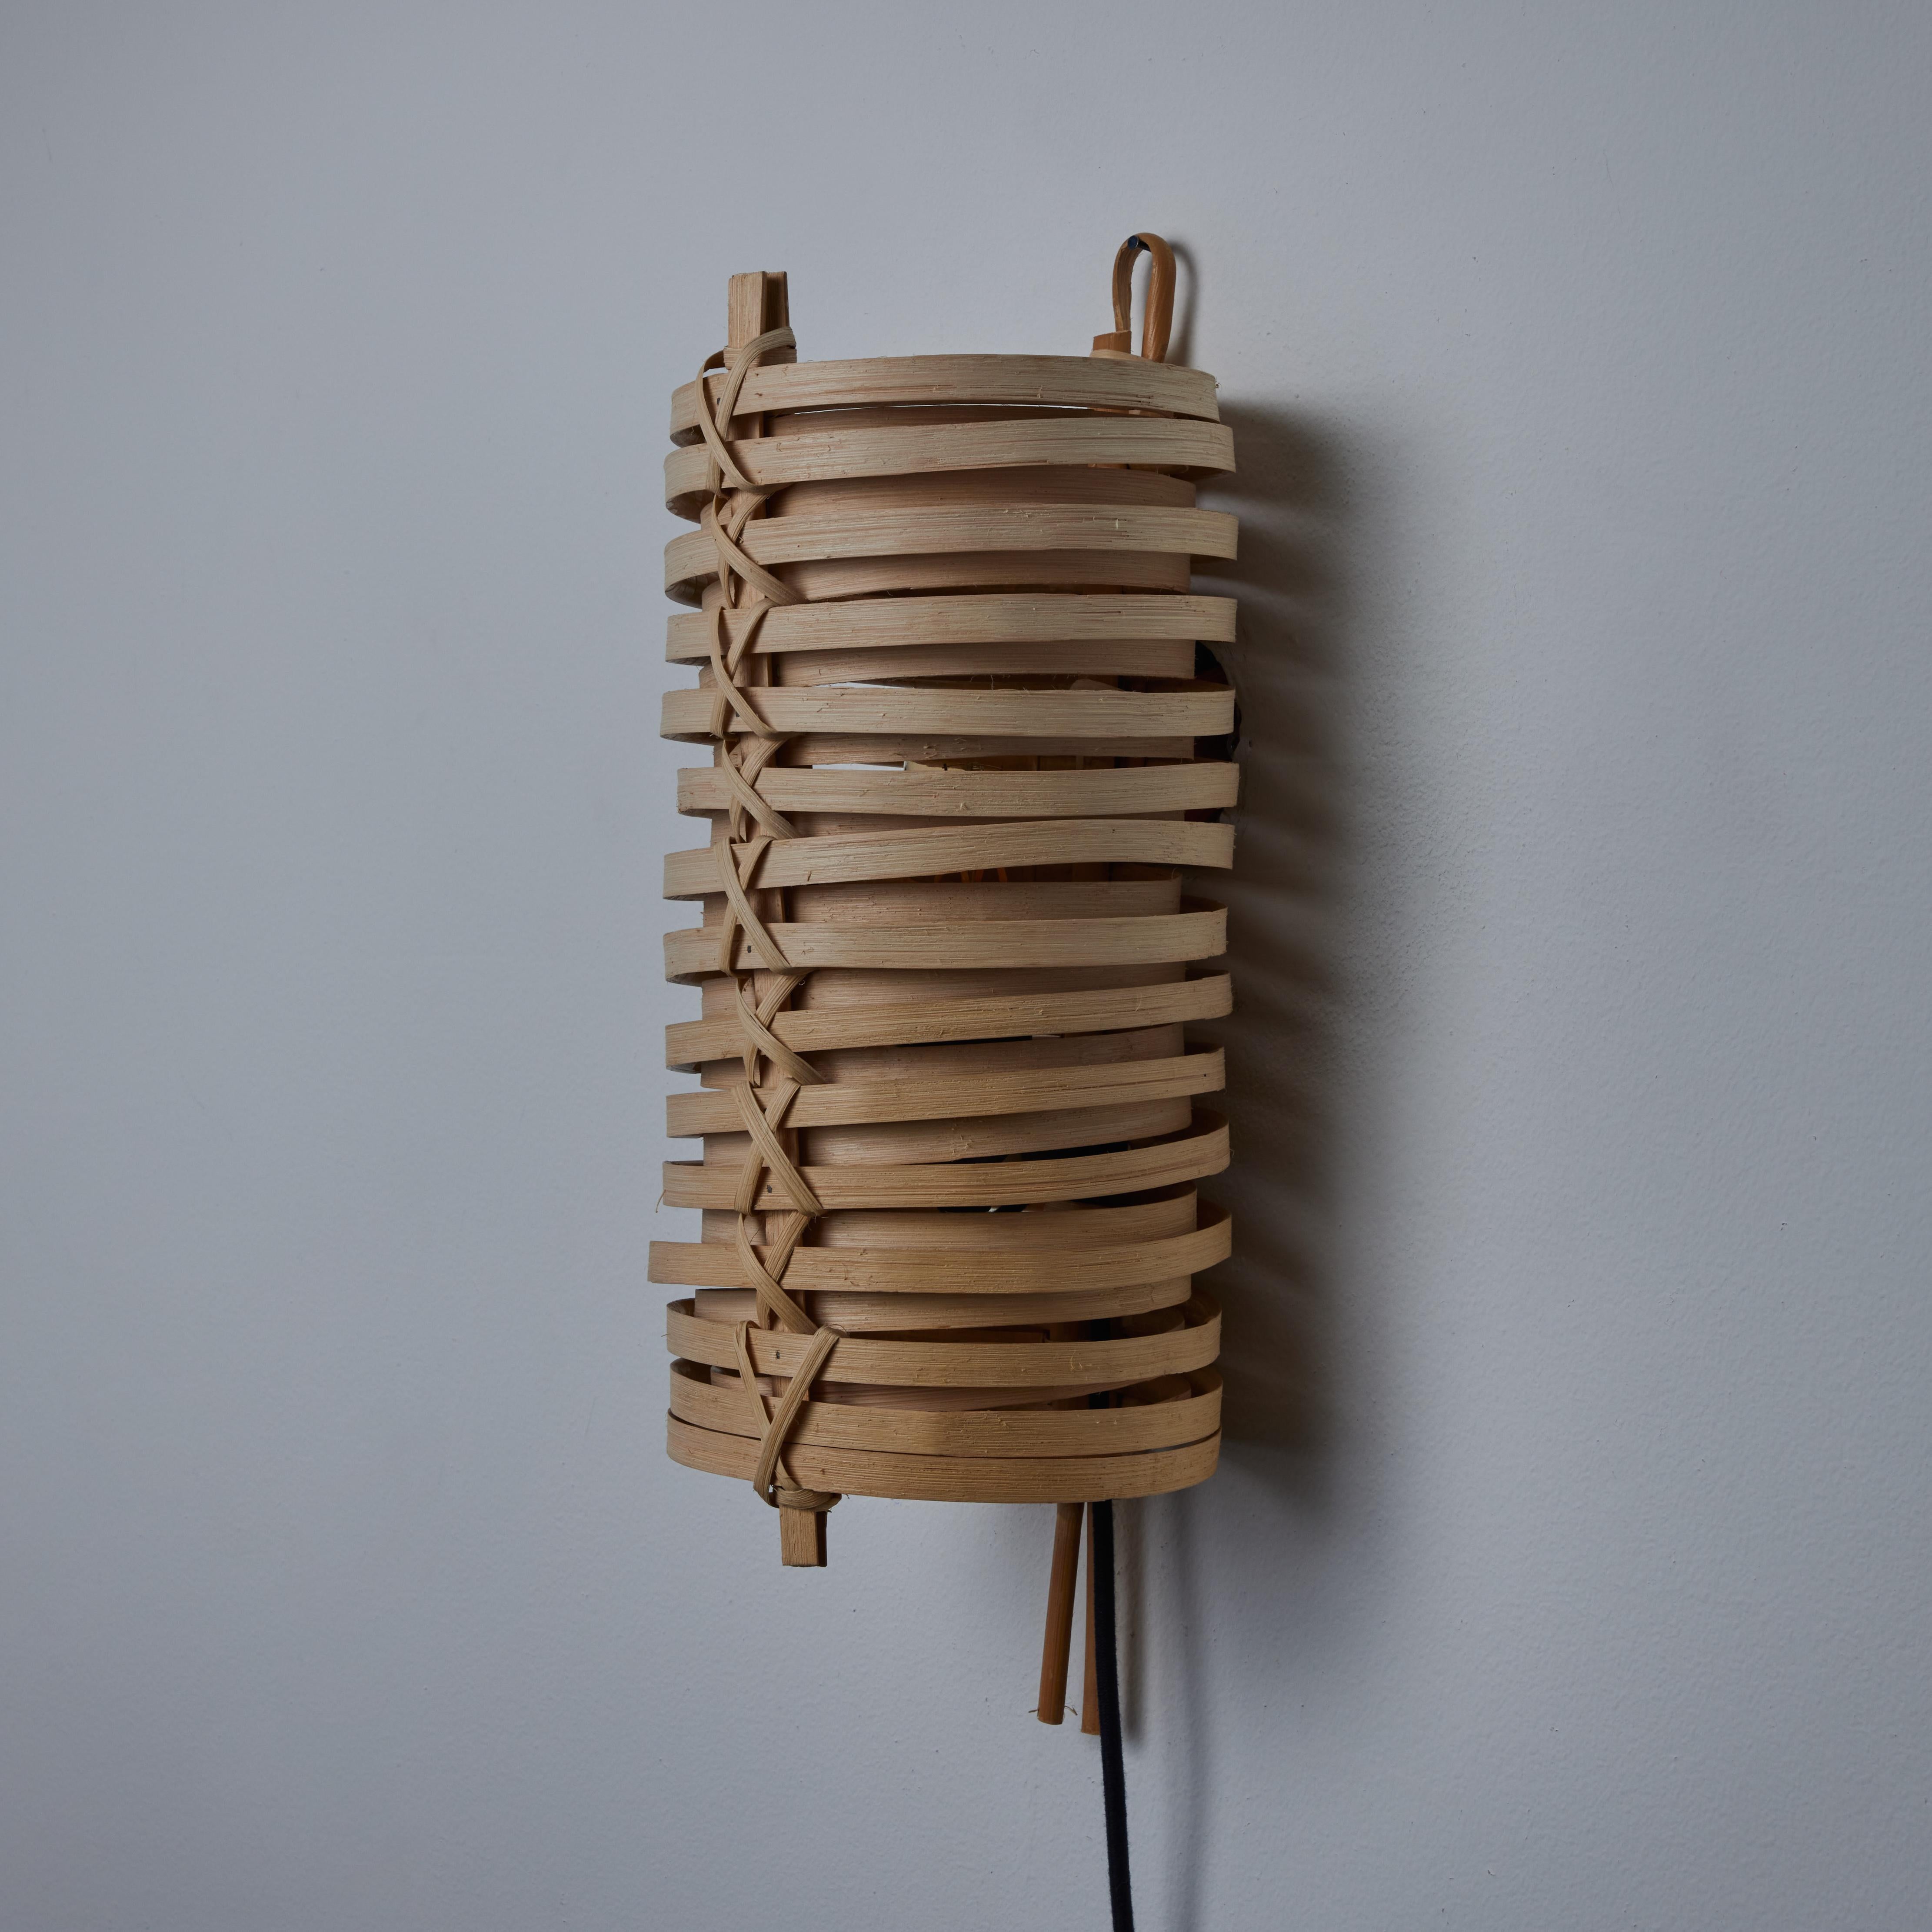 J.A. Coderch 'Junco' Rattan Cane Wall Lamp for Tunds For Sale 11